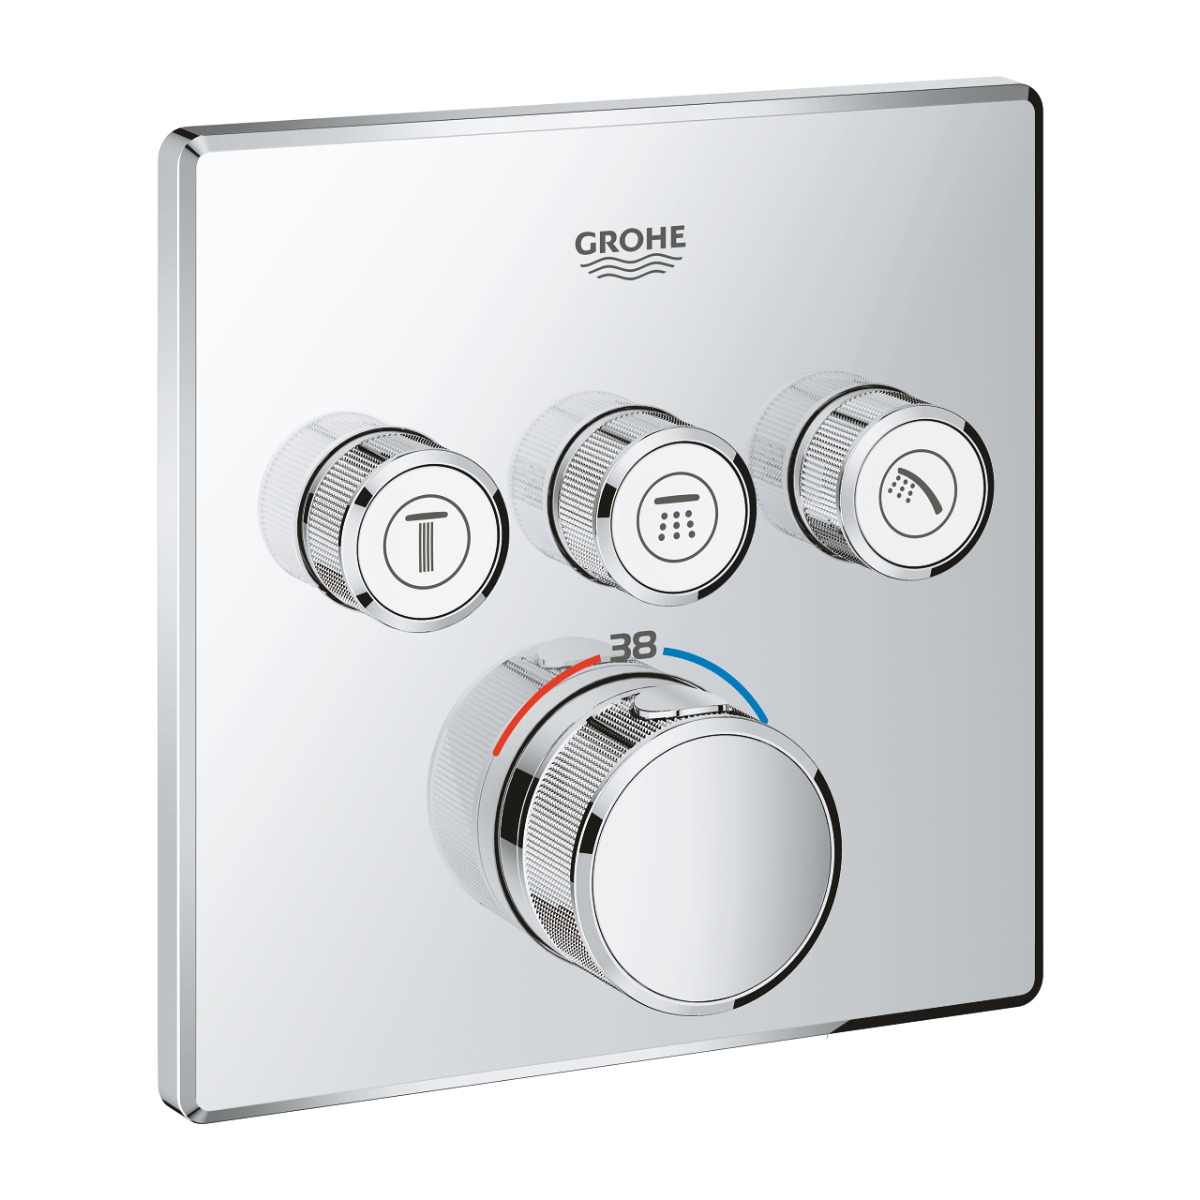 Baterie dus Grohe Grohtherm SmartControl termostat